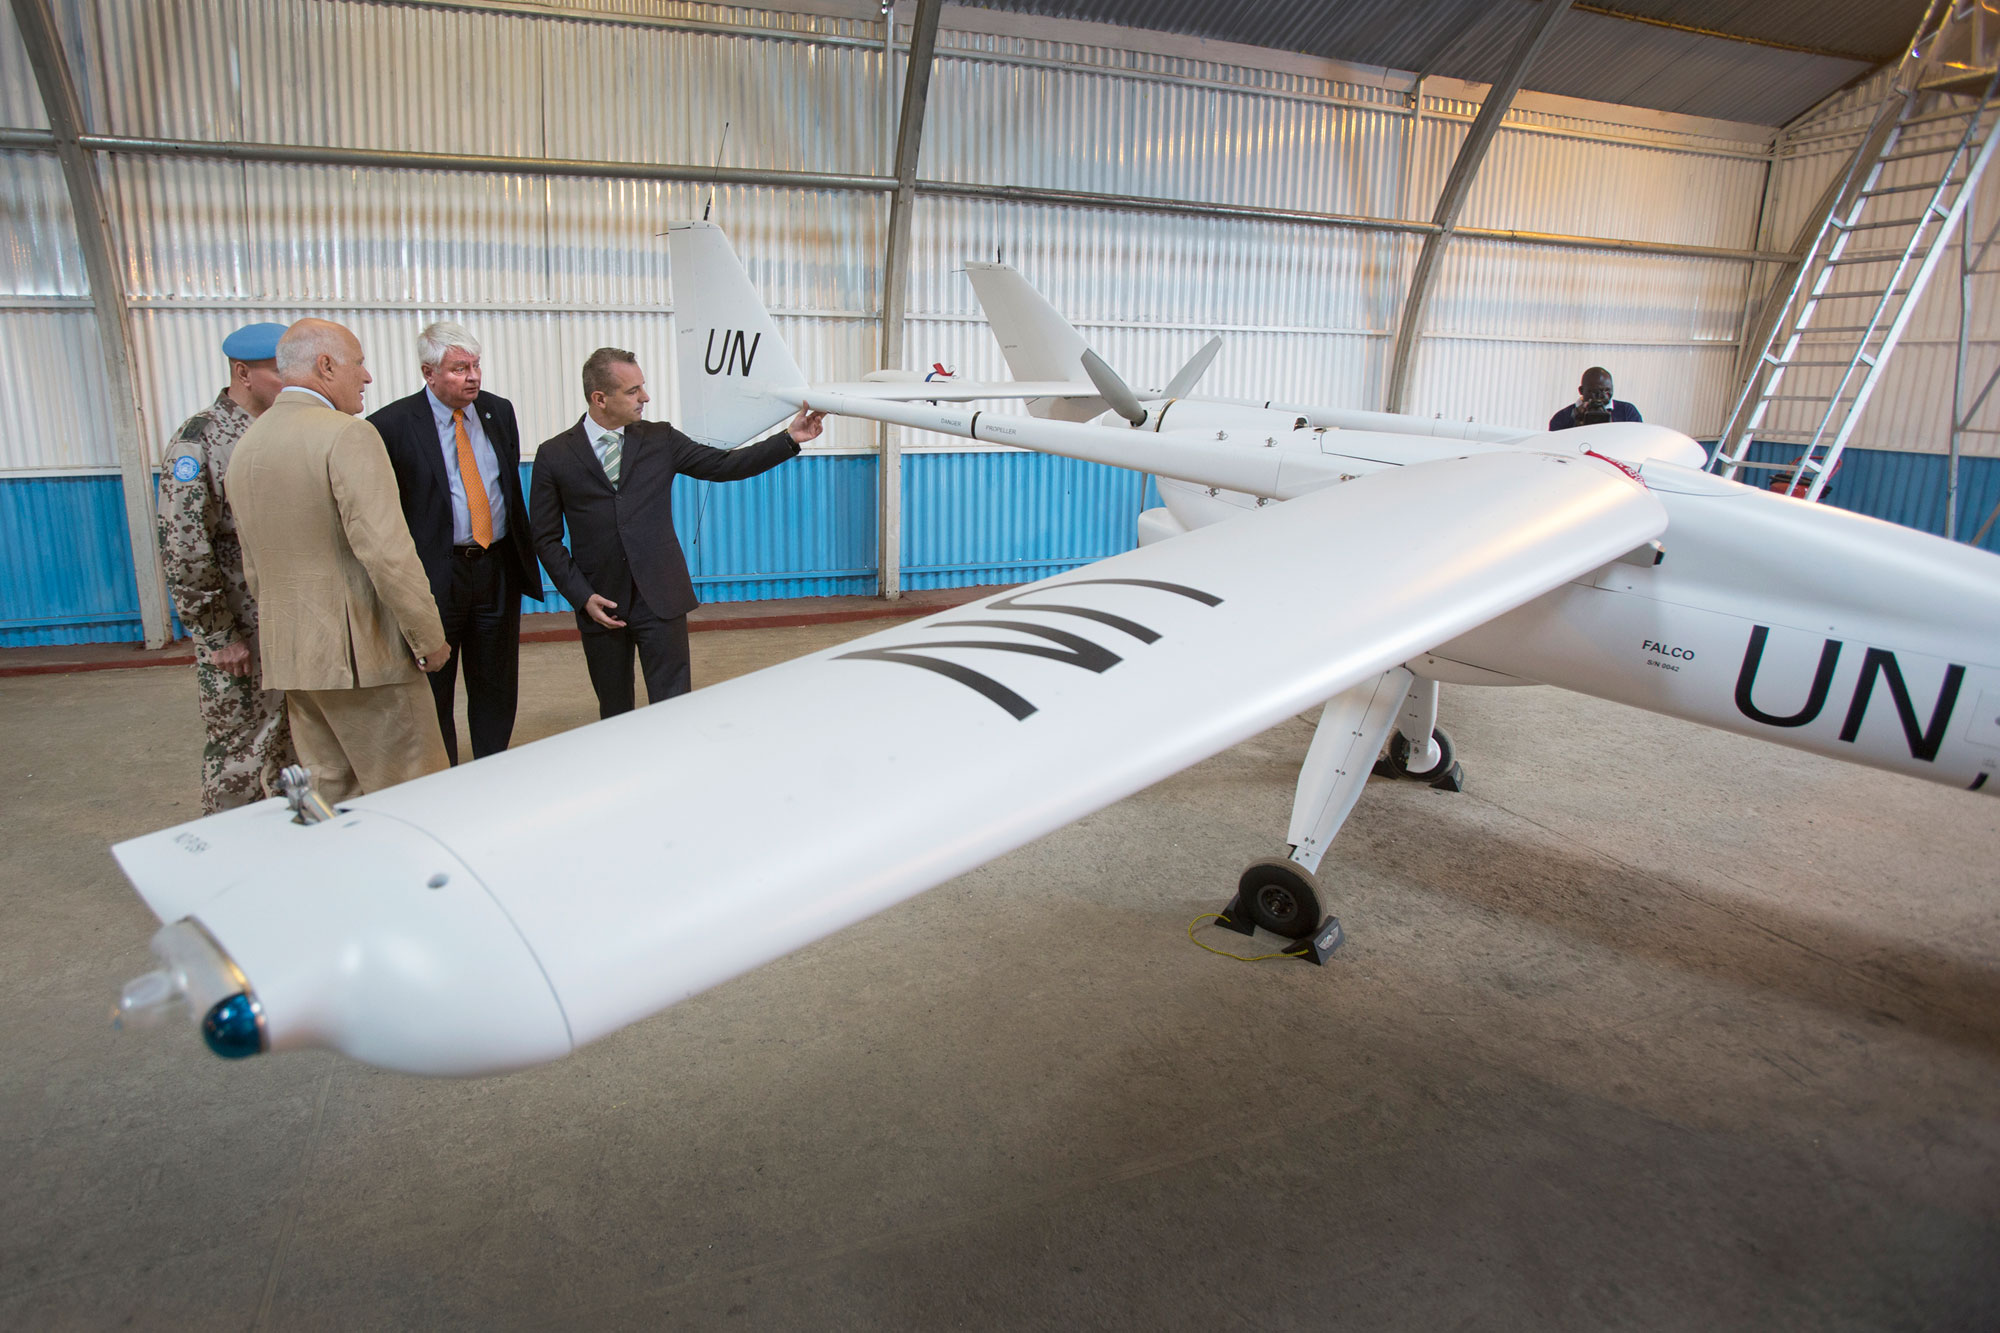 Under-Secretary-General Hervé Ladsous (second from right) is briefed on the unmanned aerial vehicles (UAVs) – used by the UN to enhance protection capabilities – before an official launch ceremony in Goma, Democratic Republic of the Congo, in December 2013. UN Photo/Sylvain Liechti